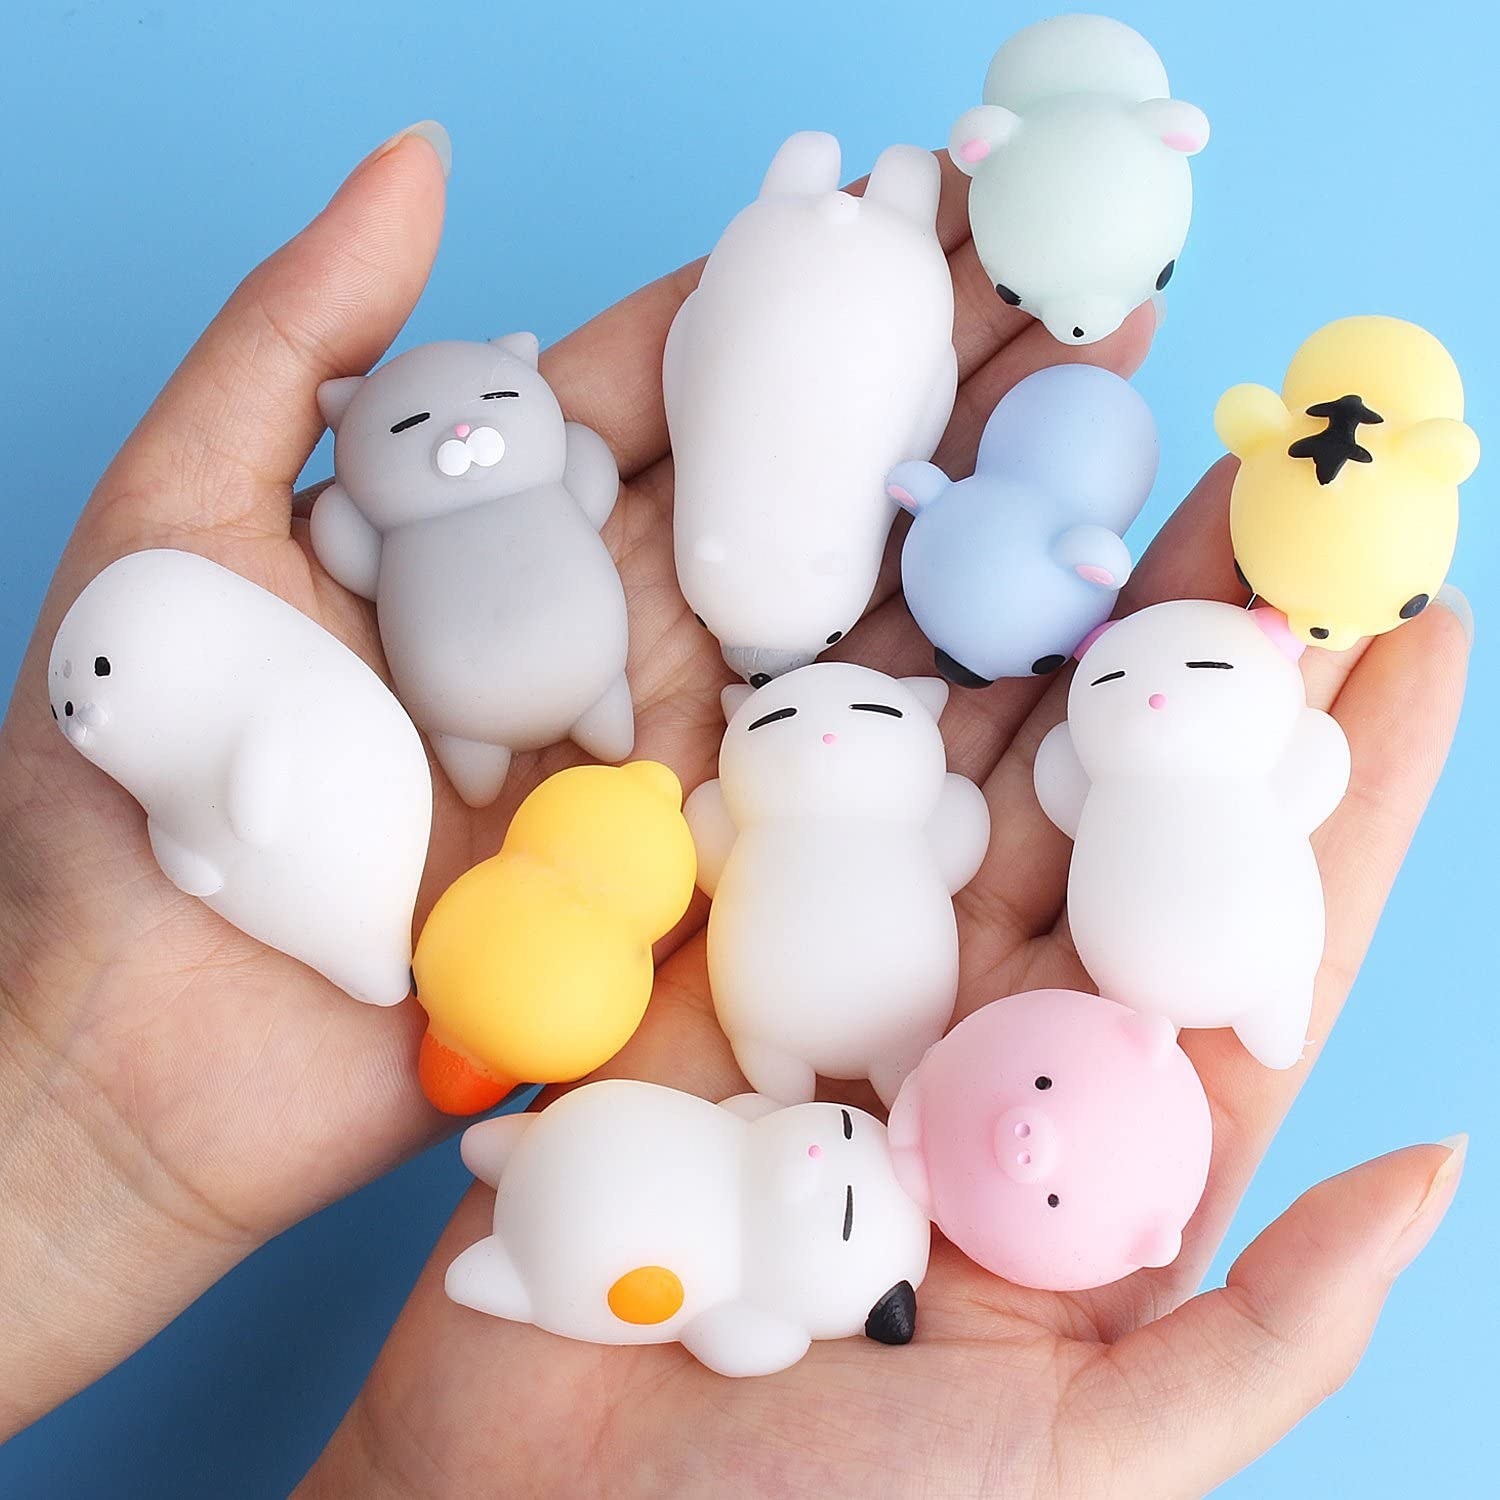 hands holding the squishy stress toys